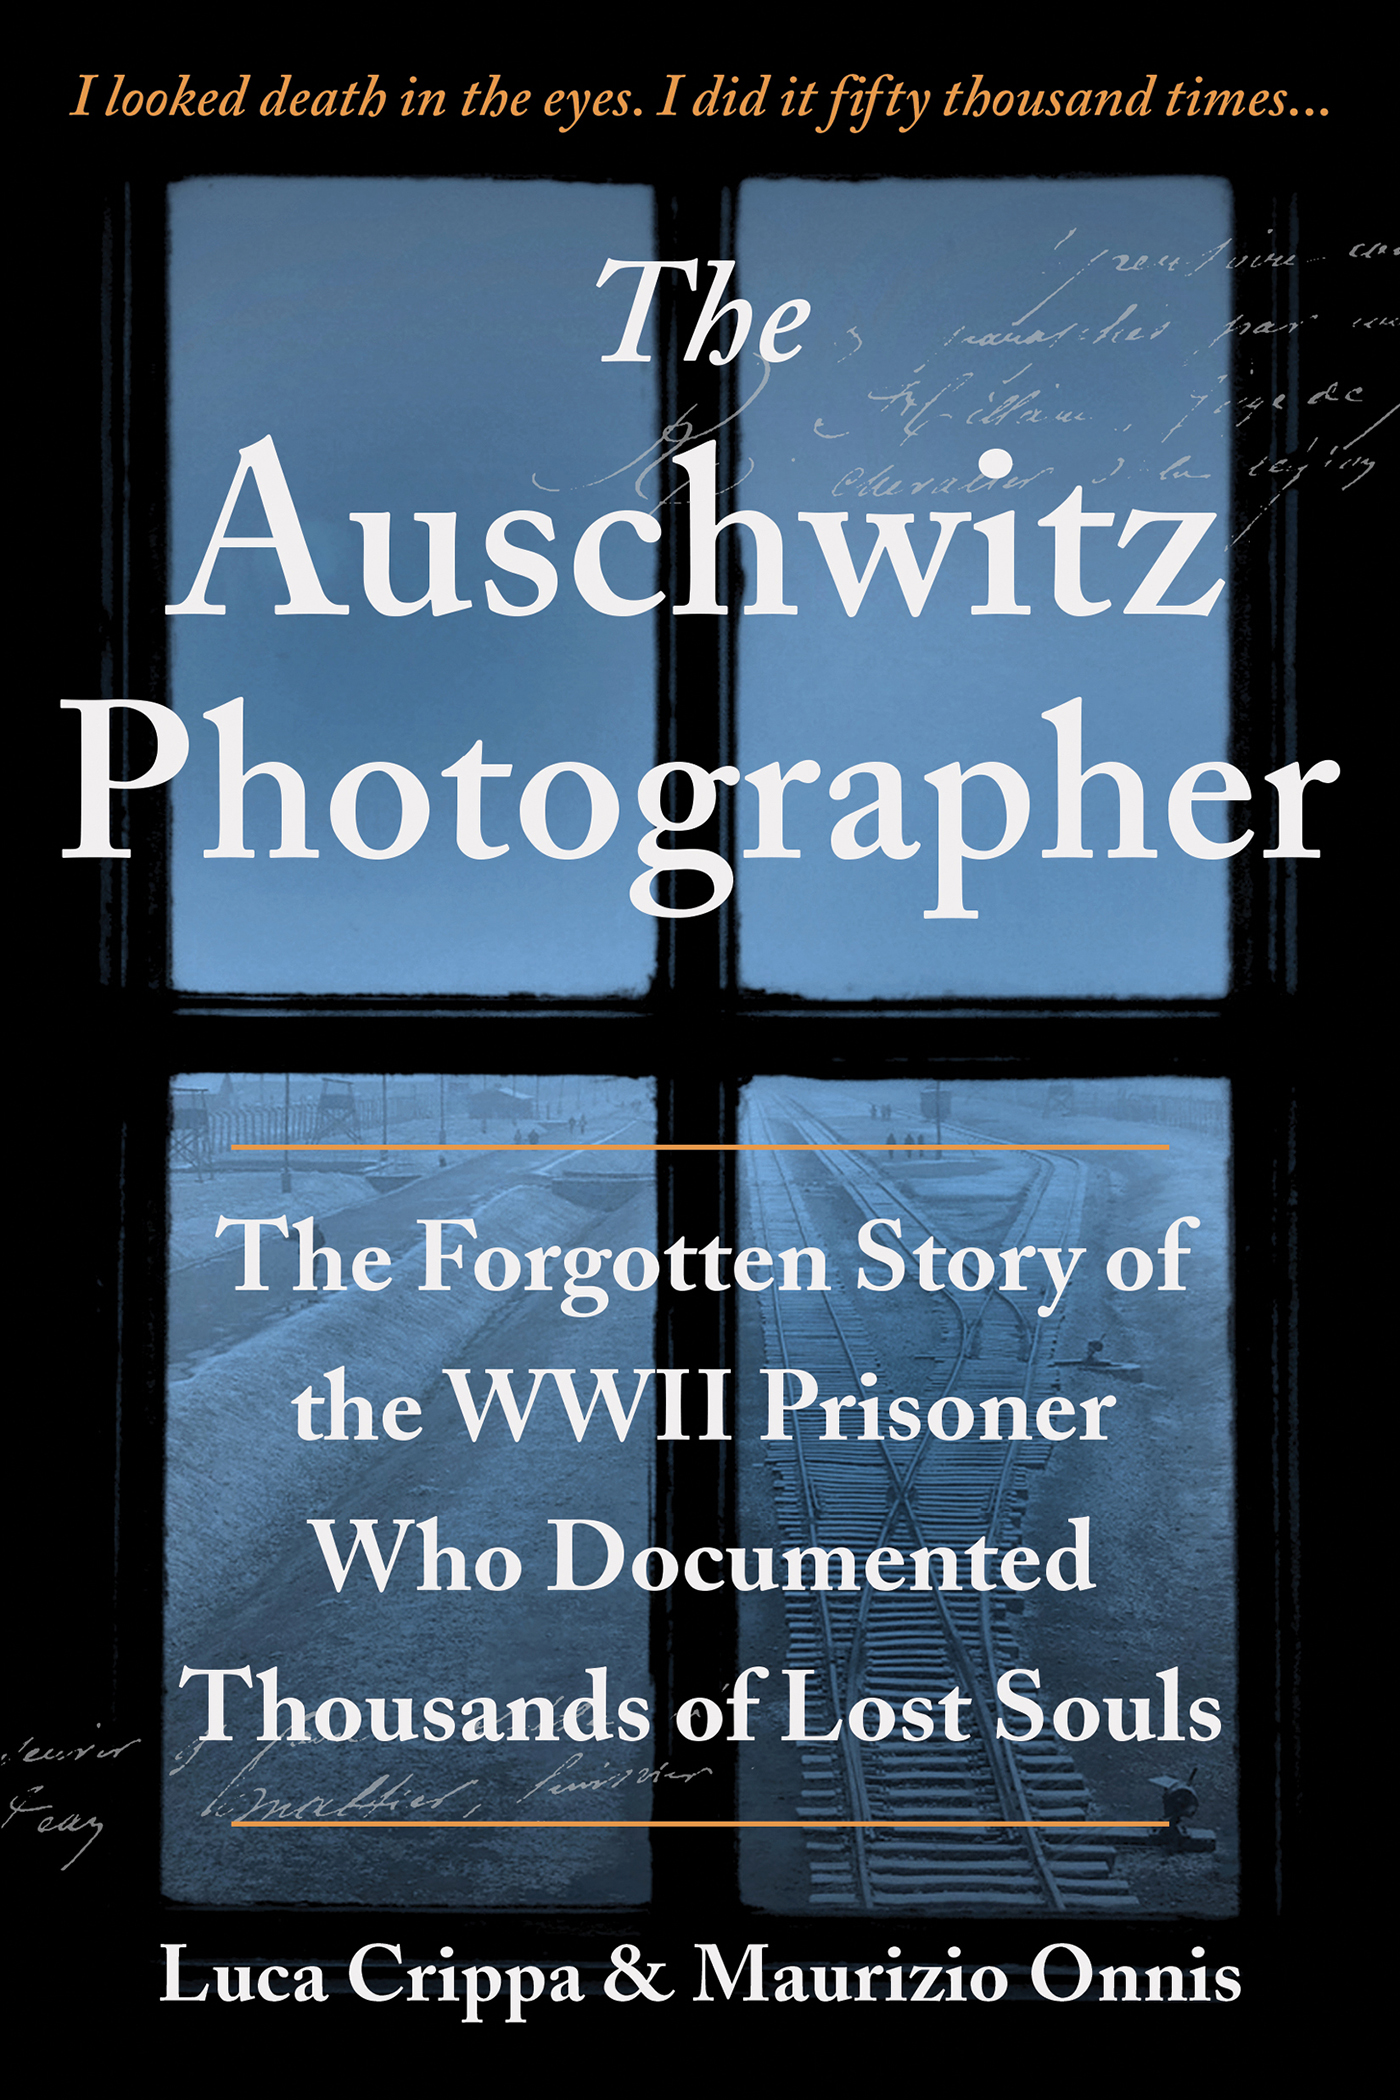 Image de couverture de The Auschwitz Photographer [electronic resource] : The Forgotten Story of the WWII Prisoner Who Documented Thousands of Lost Souls